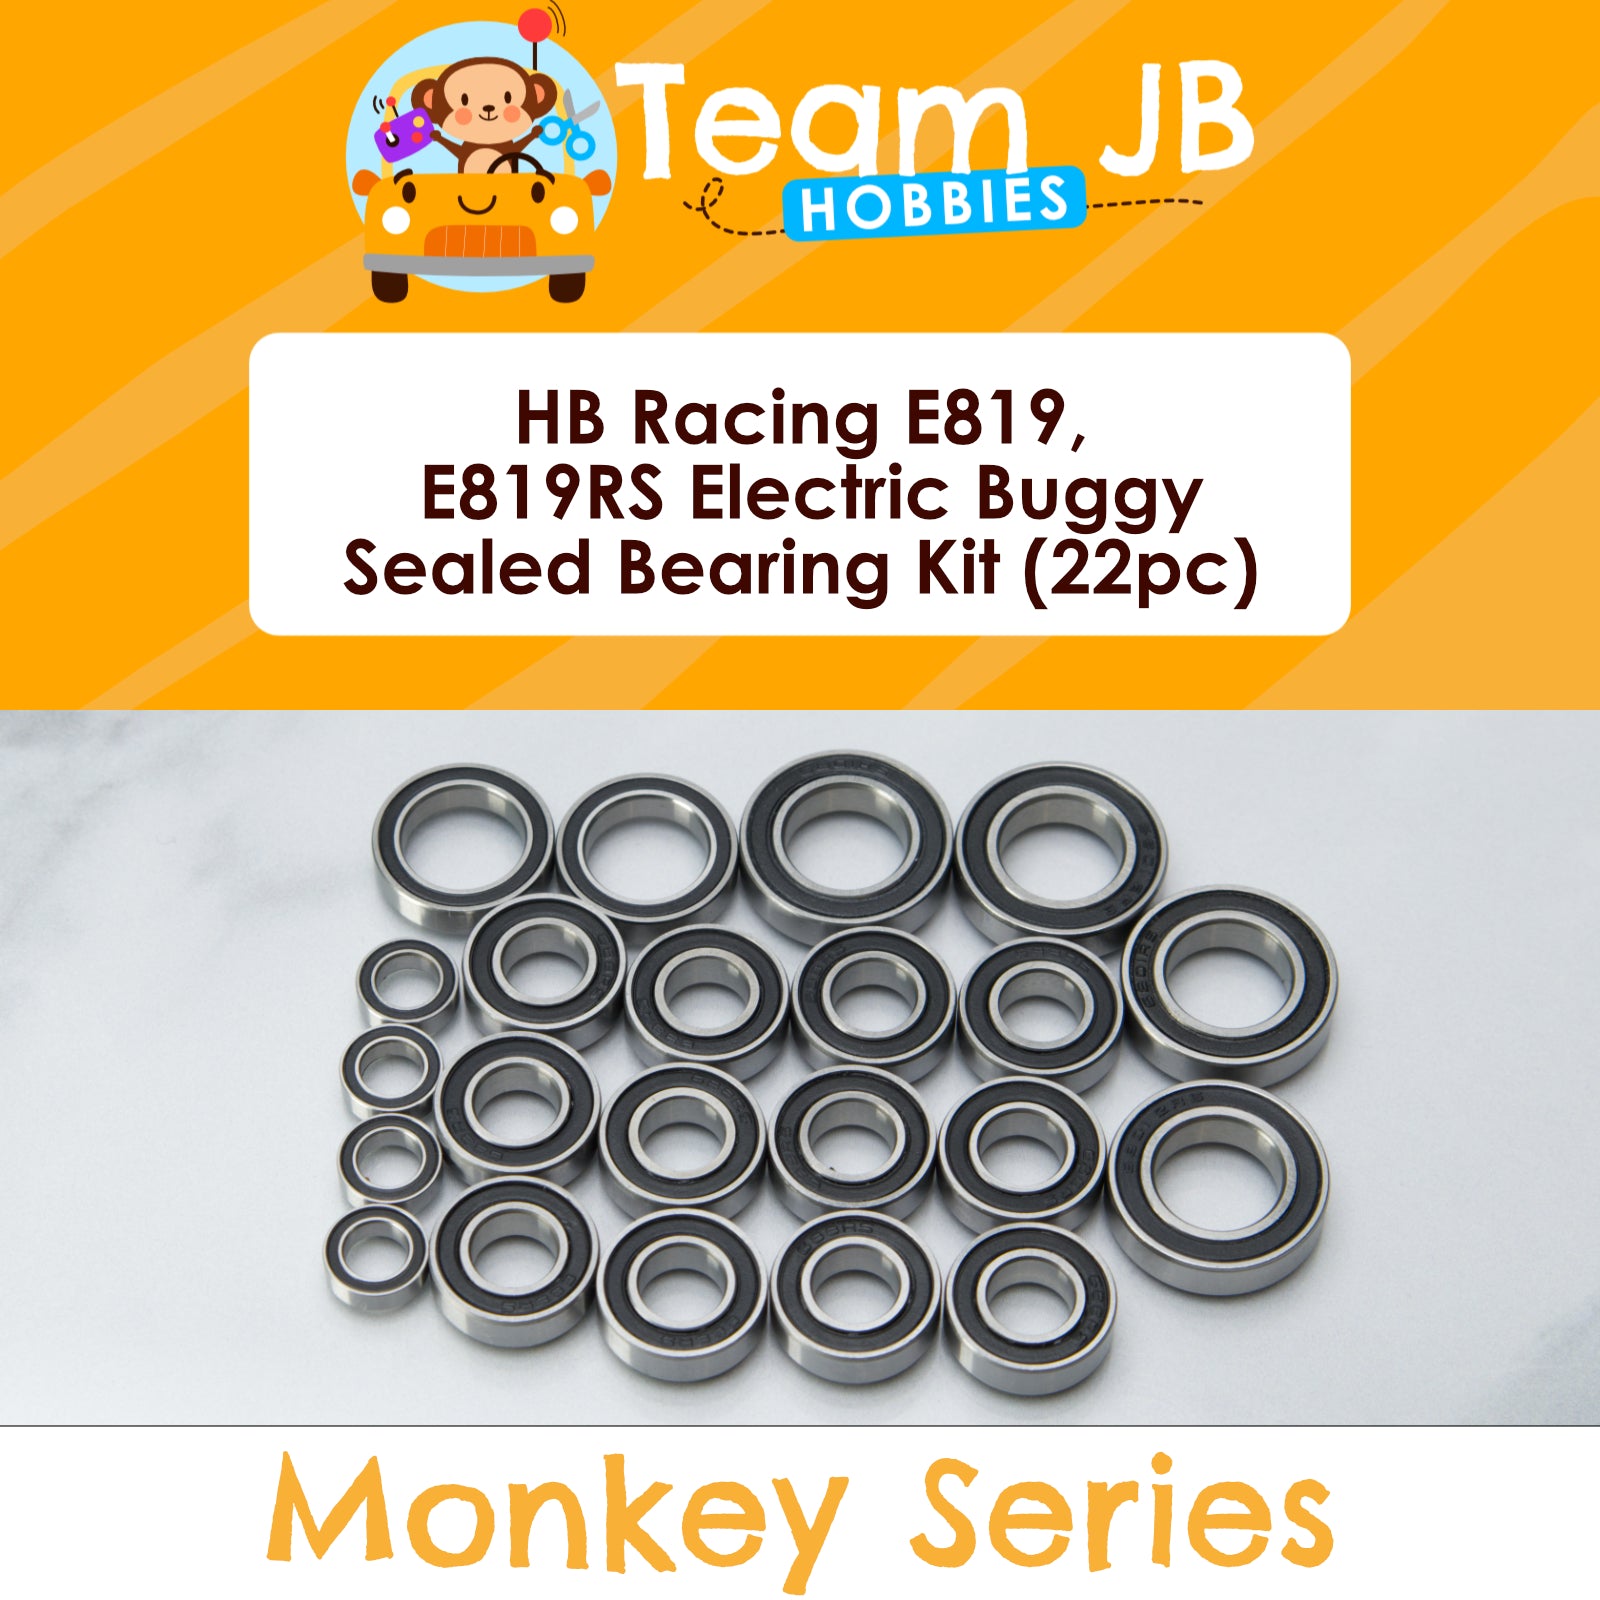 HB Racing E819 Electric Buggy, E819RS Electric Buggy - Sealed Bearing Kit